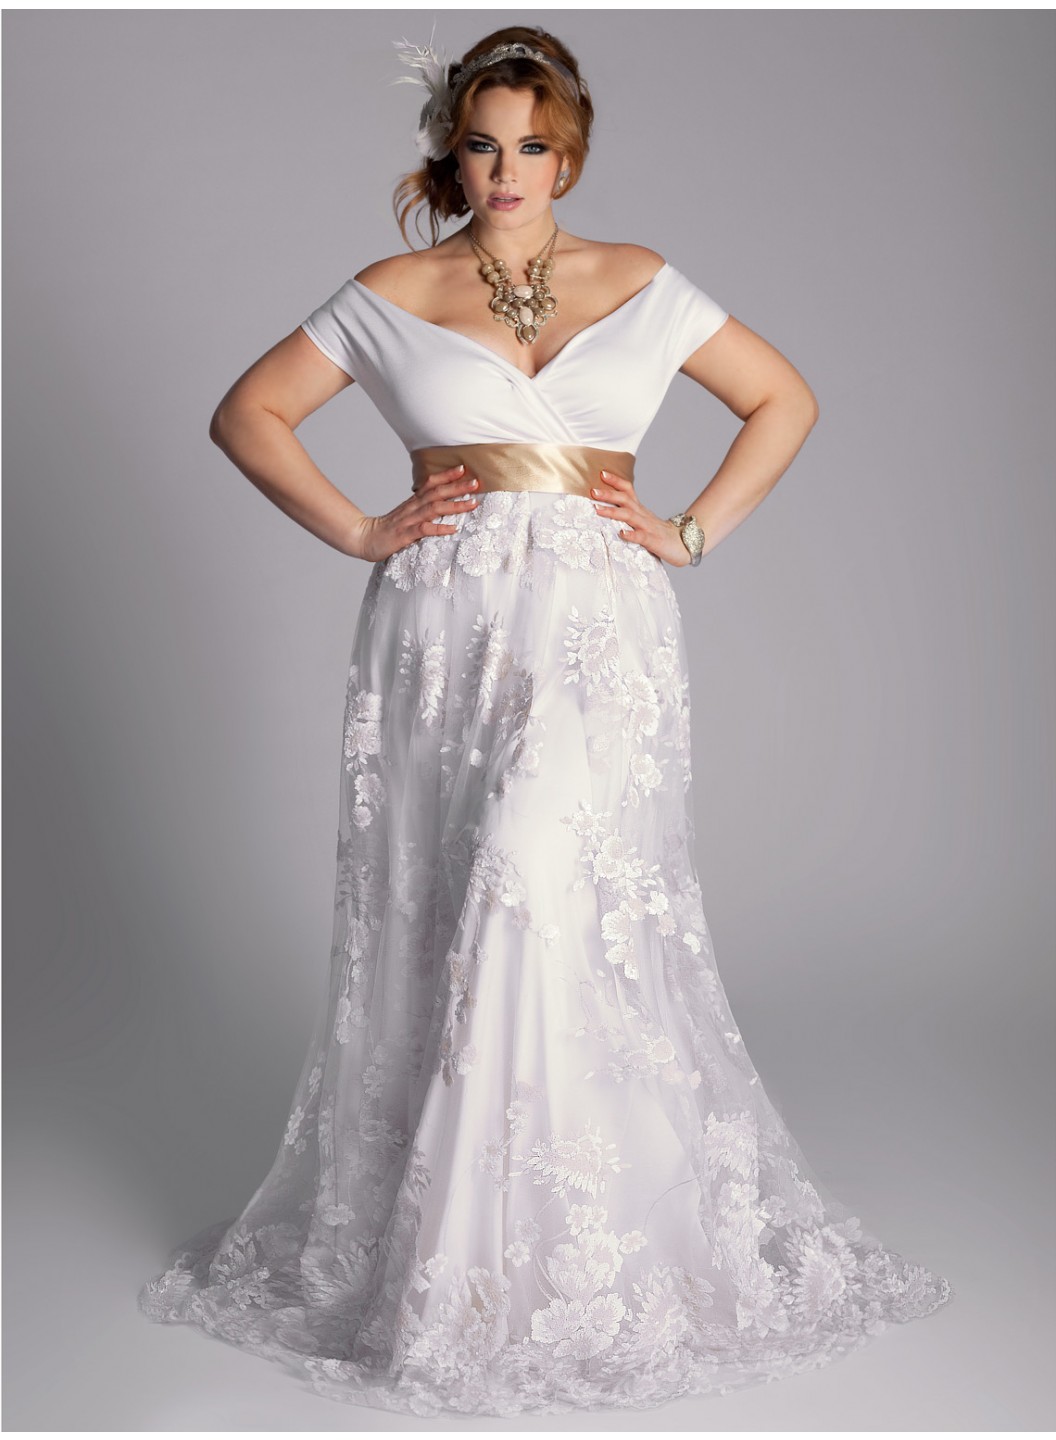 Ten Plus Size Lace Wedding Dresses That You Will Love